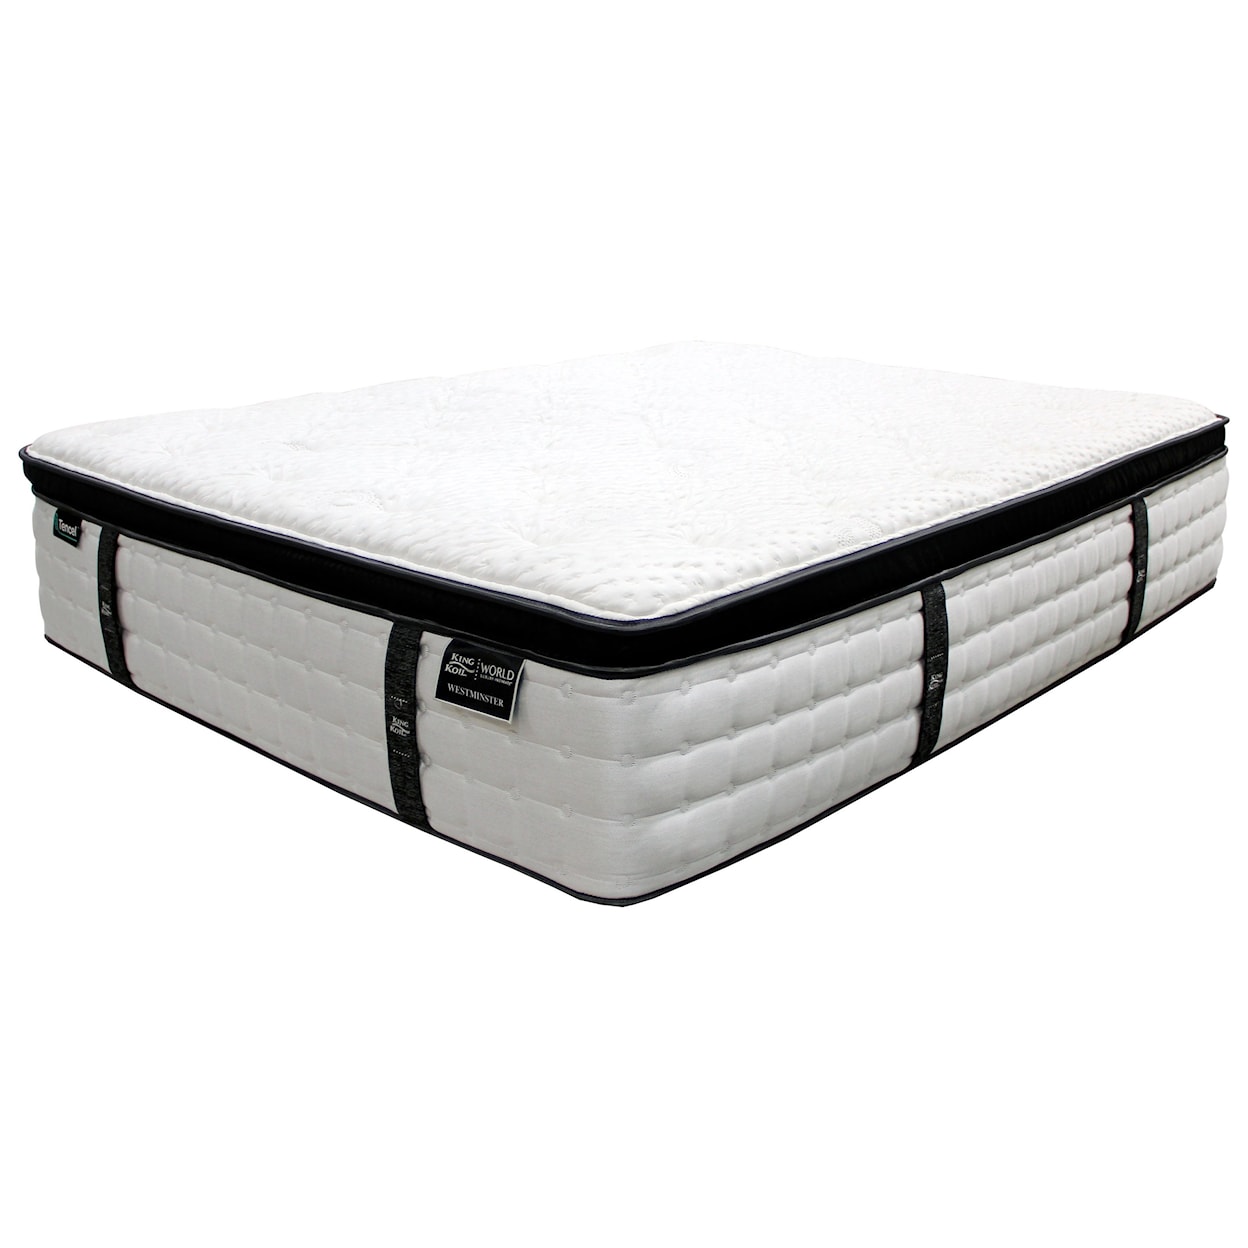 King Koil Westminster CET Twin XL Pocketed Coil Mattress Set